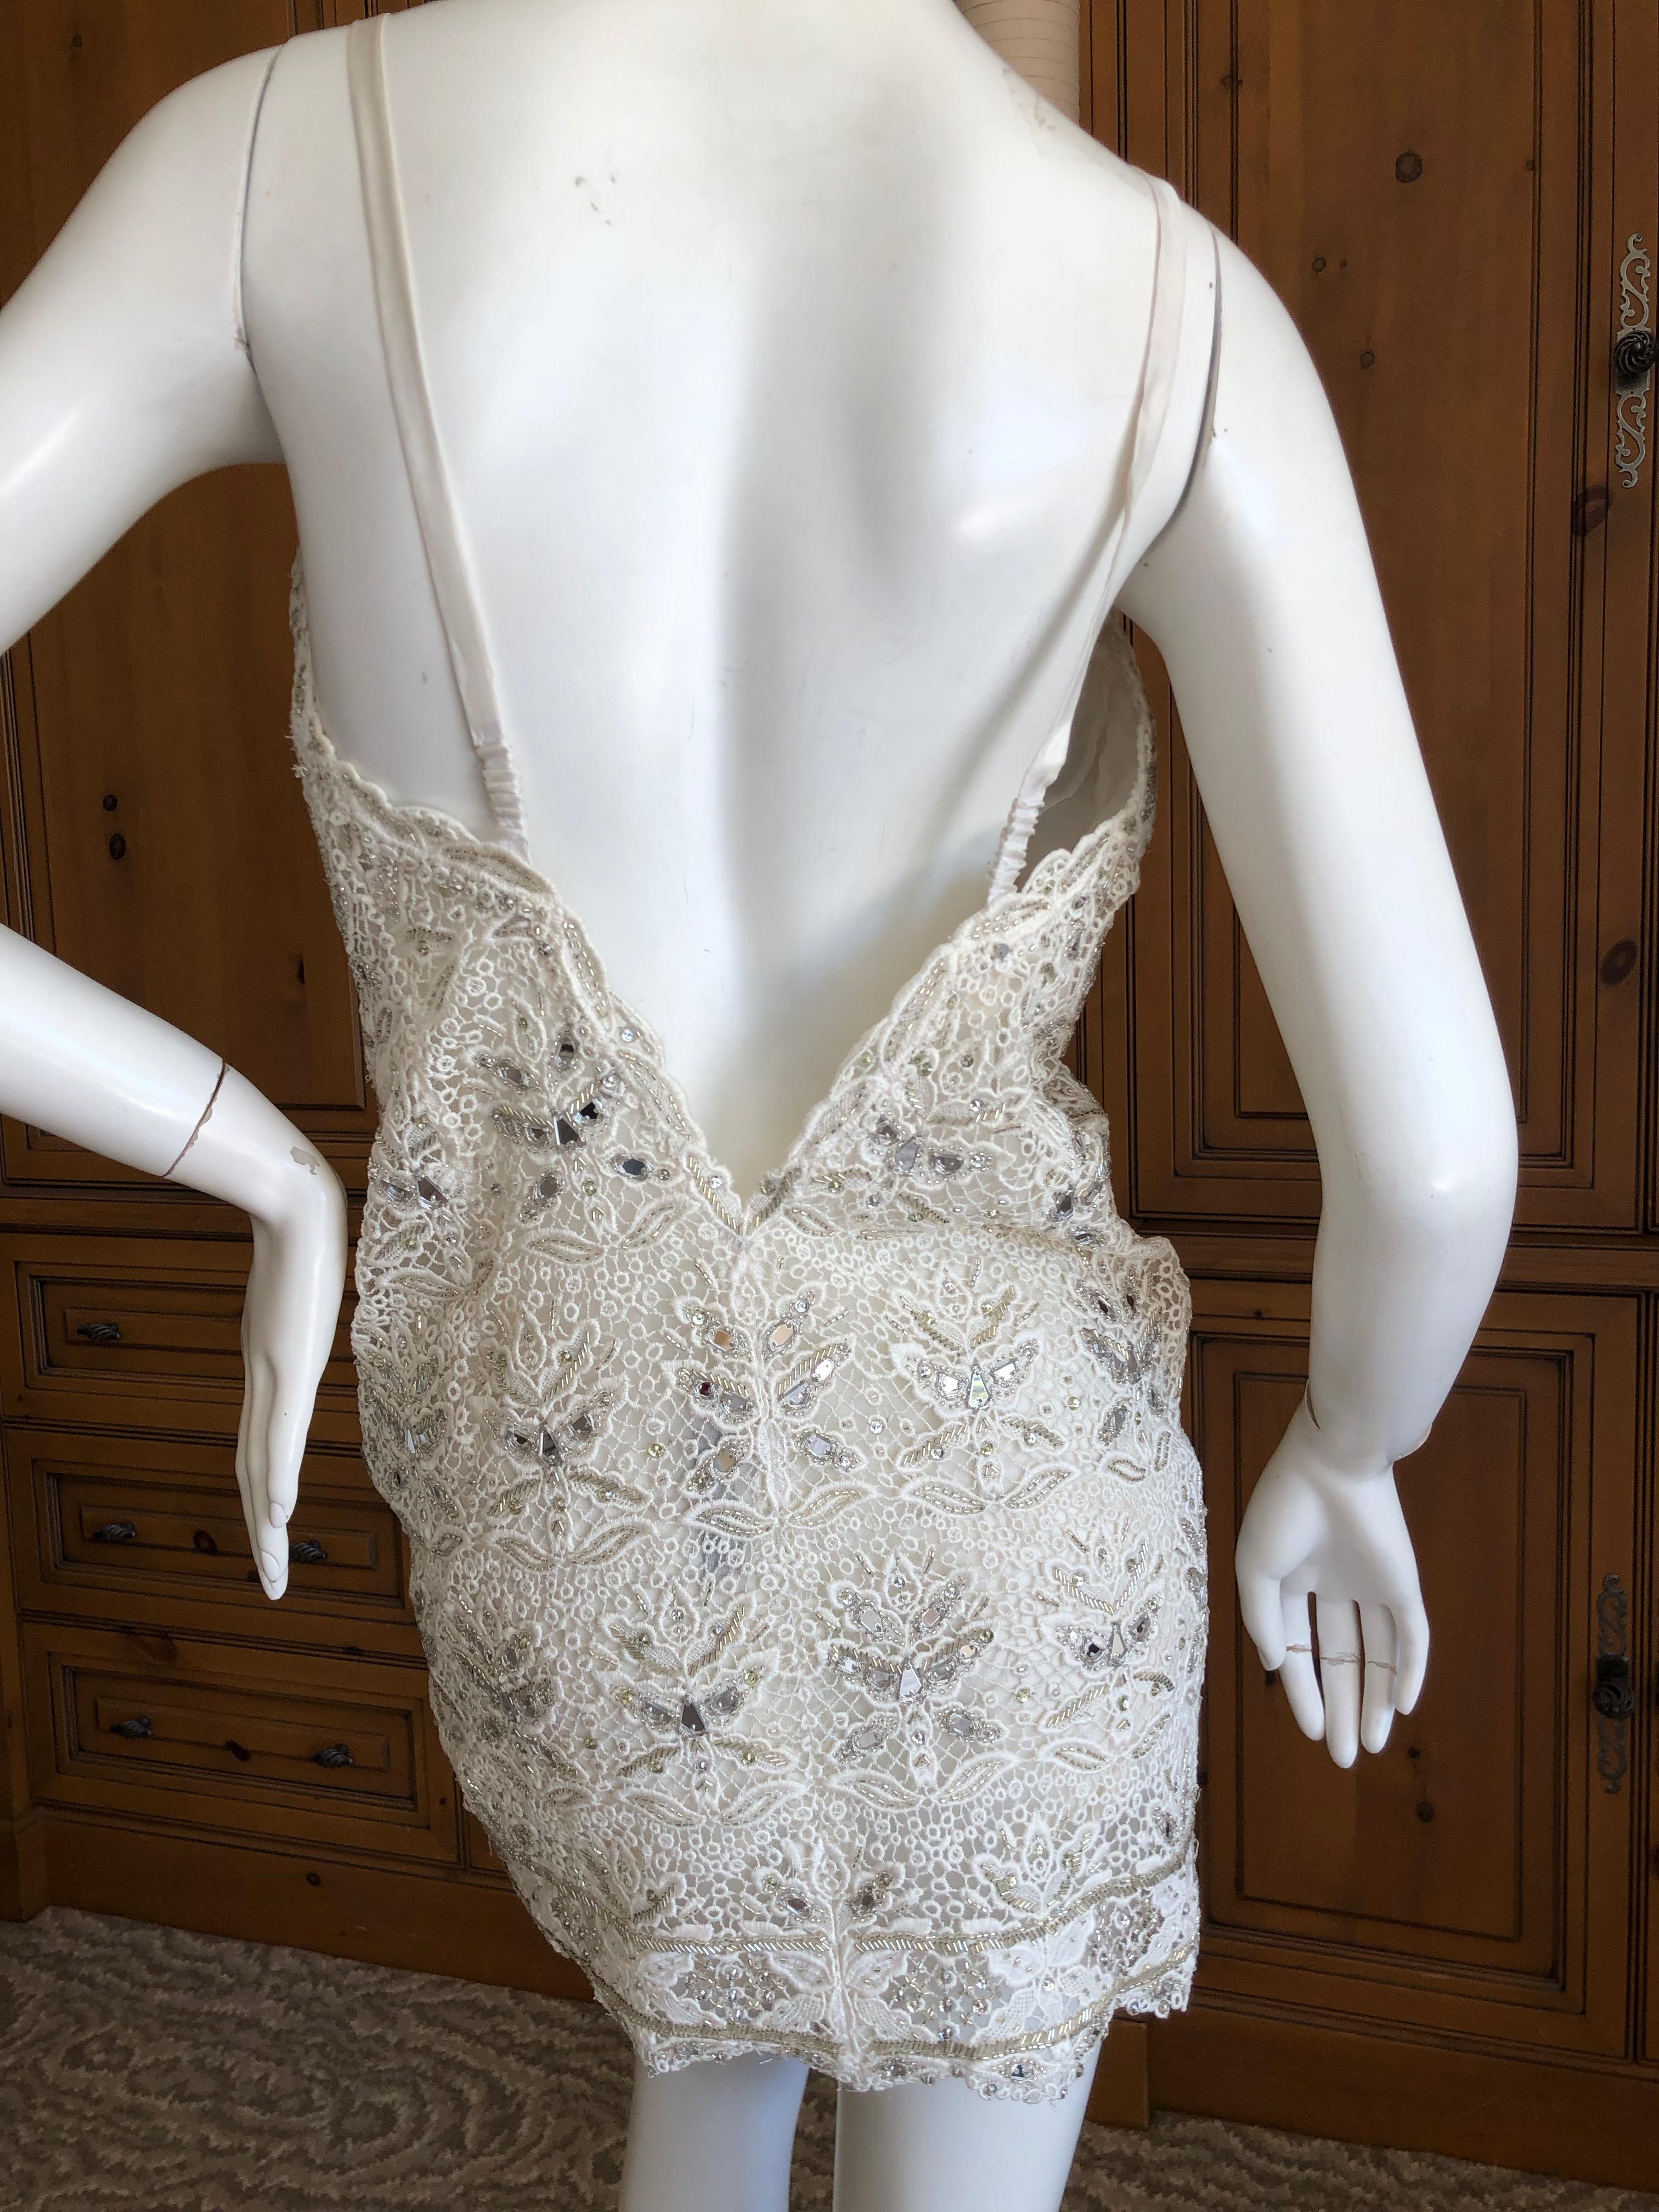 Emilio Pucci White Lace Micro Mini Dress with Mirror and Bead Embellishment Sz 4 In Excellent Condition For Sale In Cloverdale, CA